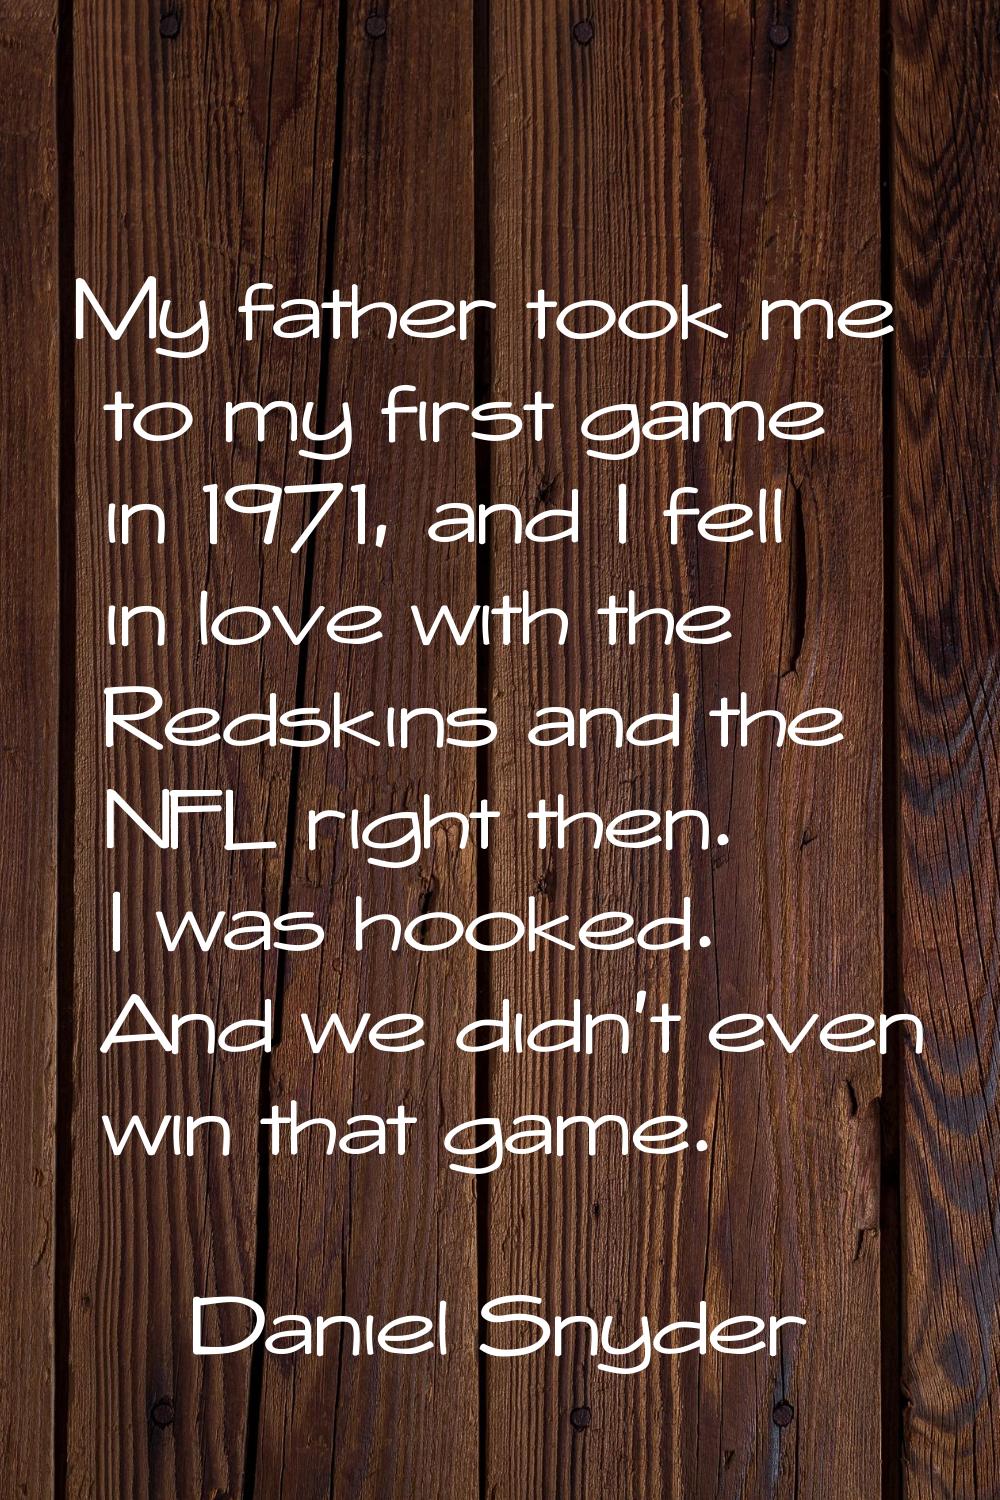 My father took me to my first game in 1971, and I fell in love with the Redskins and the NFL right 